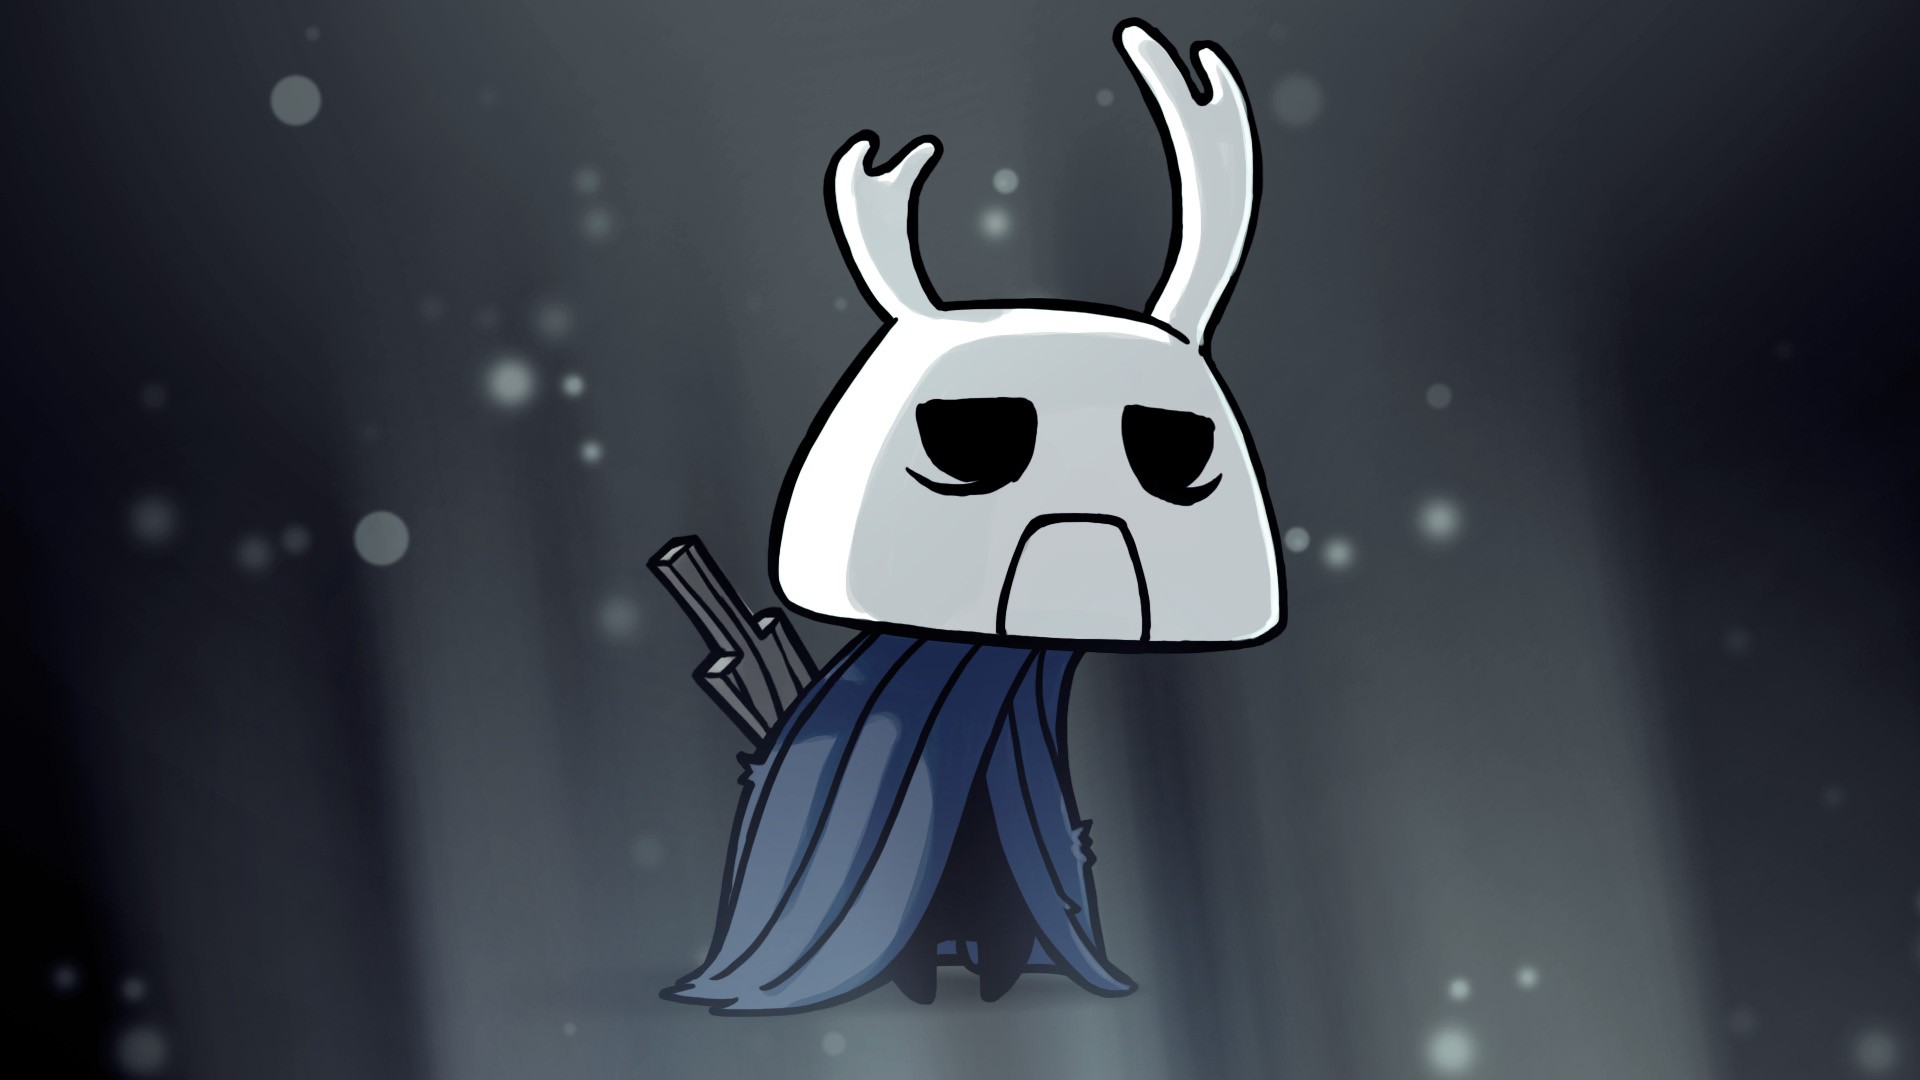 HD Hollow Knight Backgrounds with high-resolution 1920x1080 pixel. You can use this wallpaper for your Windows and Mac OS computers as well as your Android and iPhone smartphones